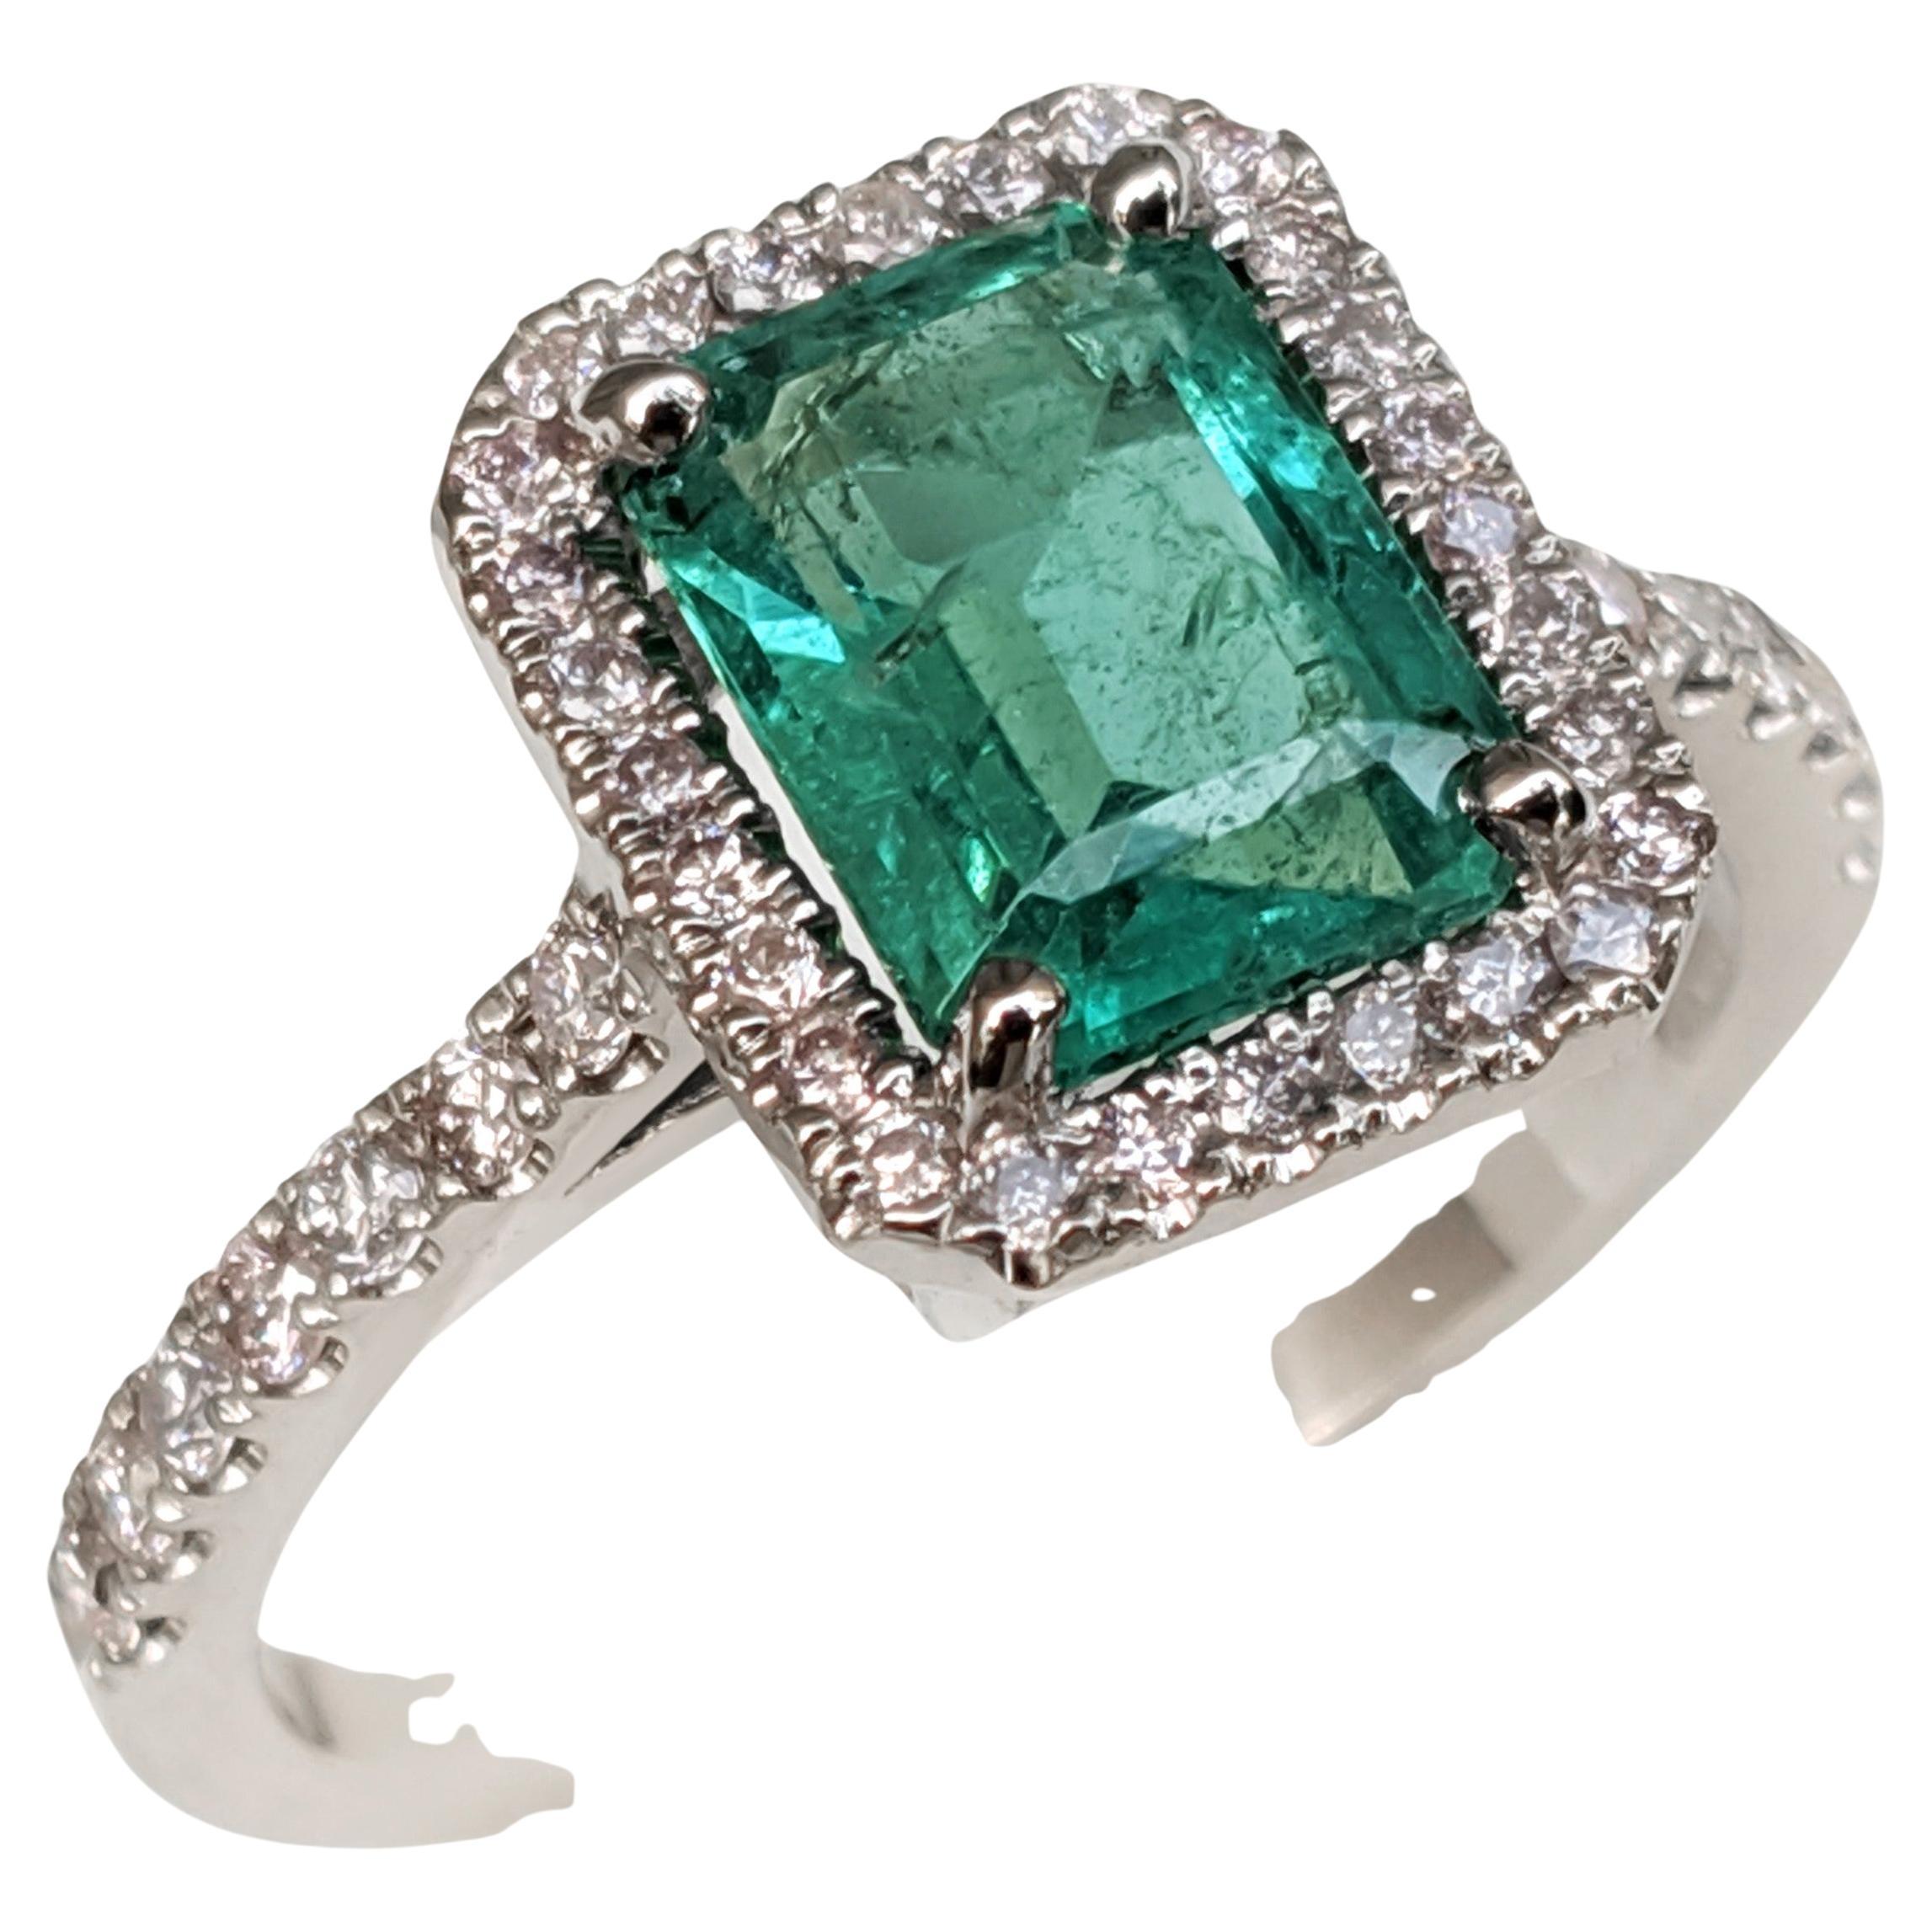 NO RESERVE! 2.05 Carat Emerald and 0.41Ct Diamonds - 14 kt. White gold - Ring